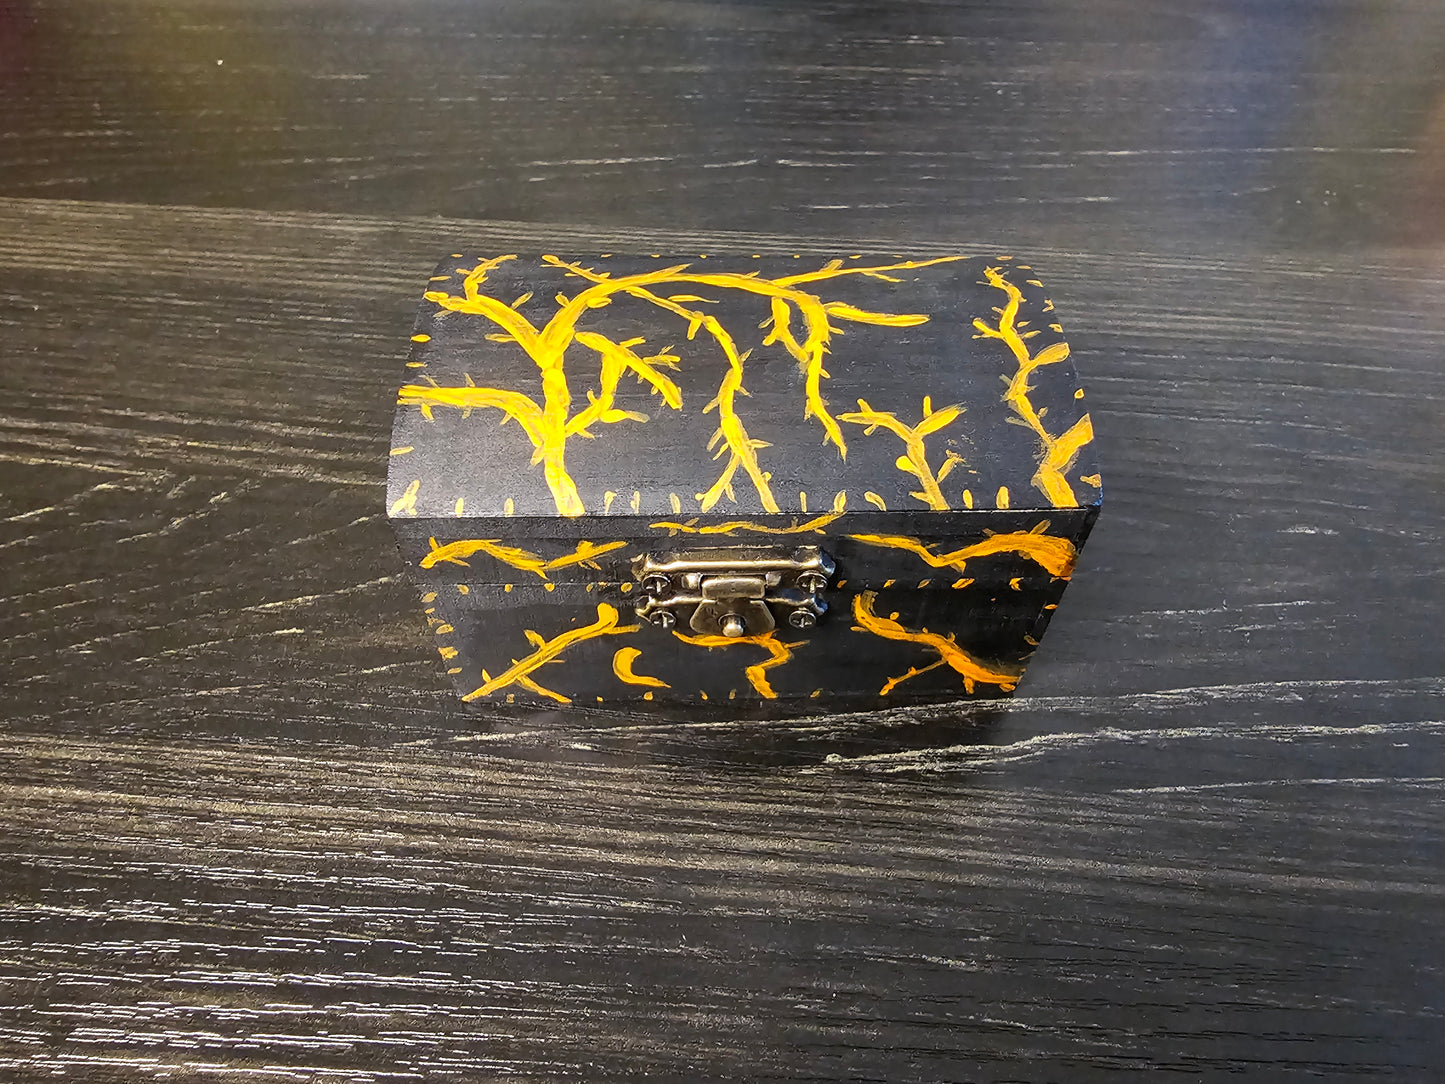 Handmade Halloween Dice Set with Hand-Painted Chest